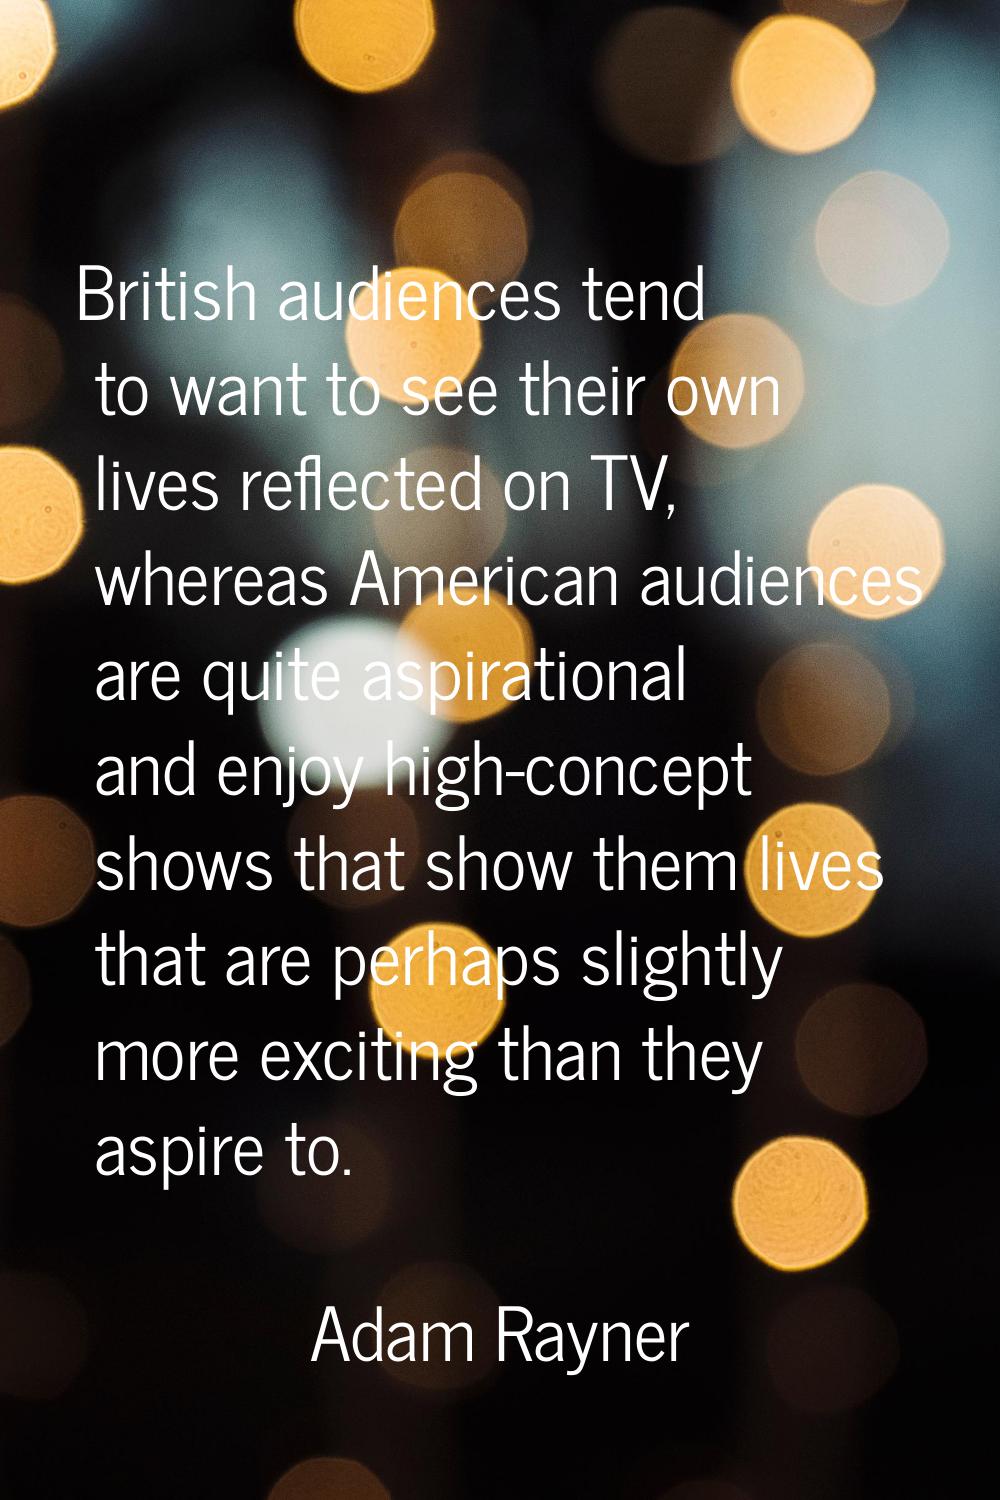 British audiences tend to want to see their own lives reflected on TV, whereas American audiences a